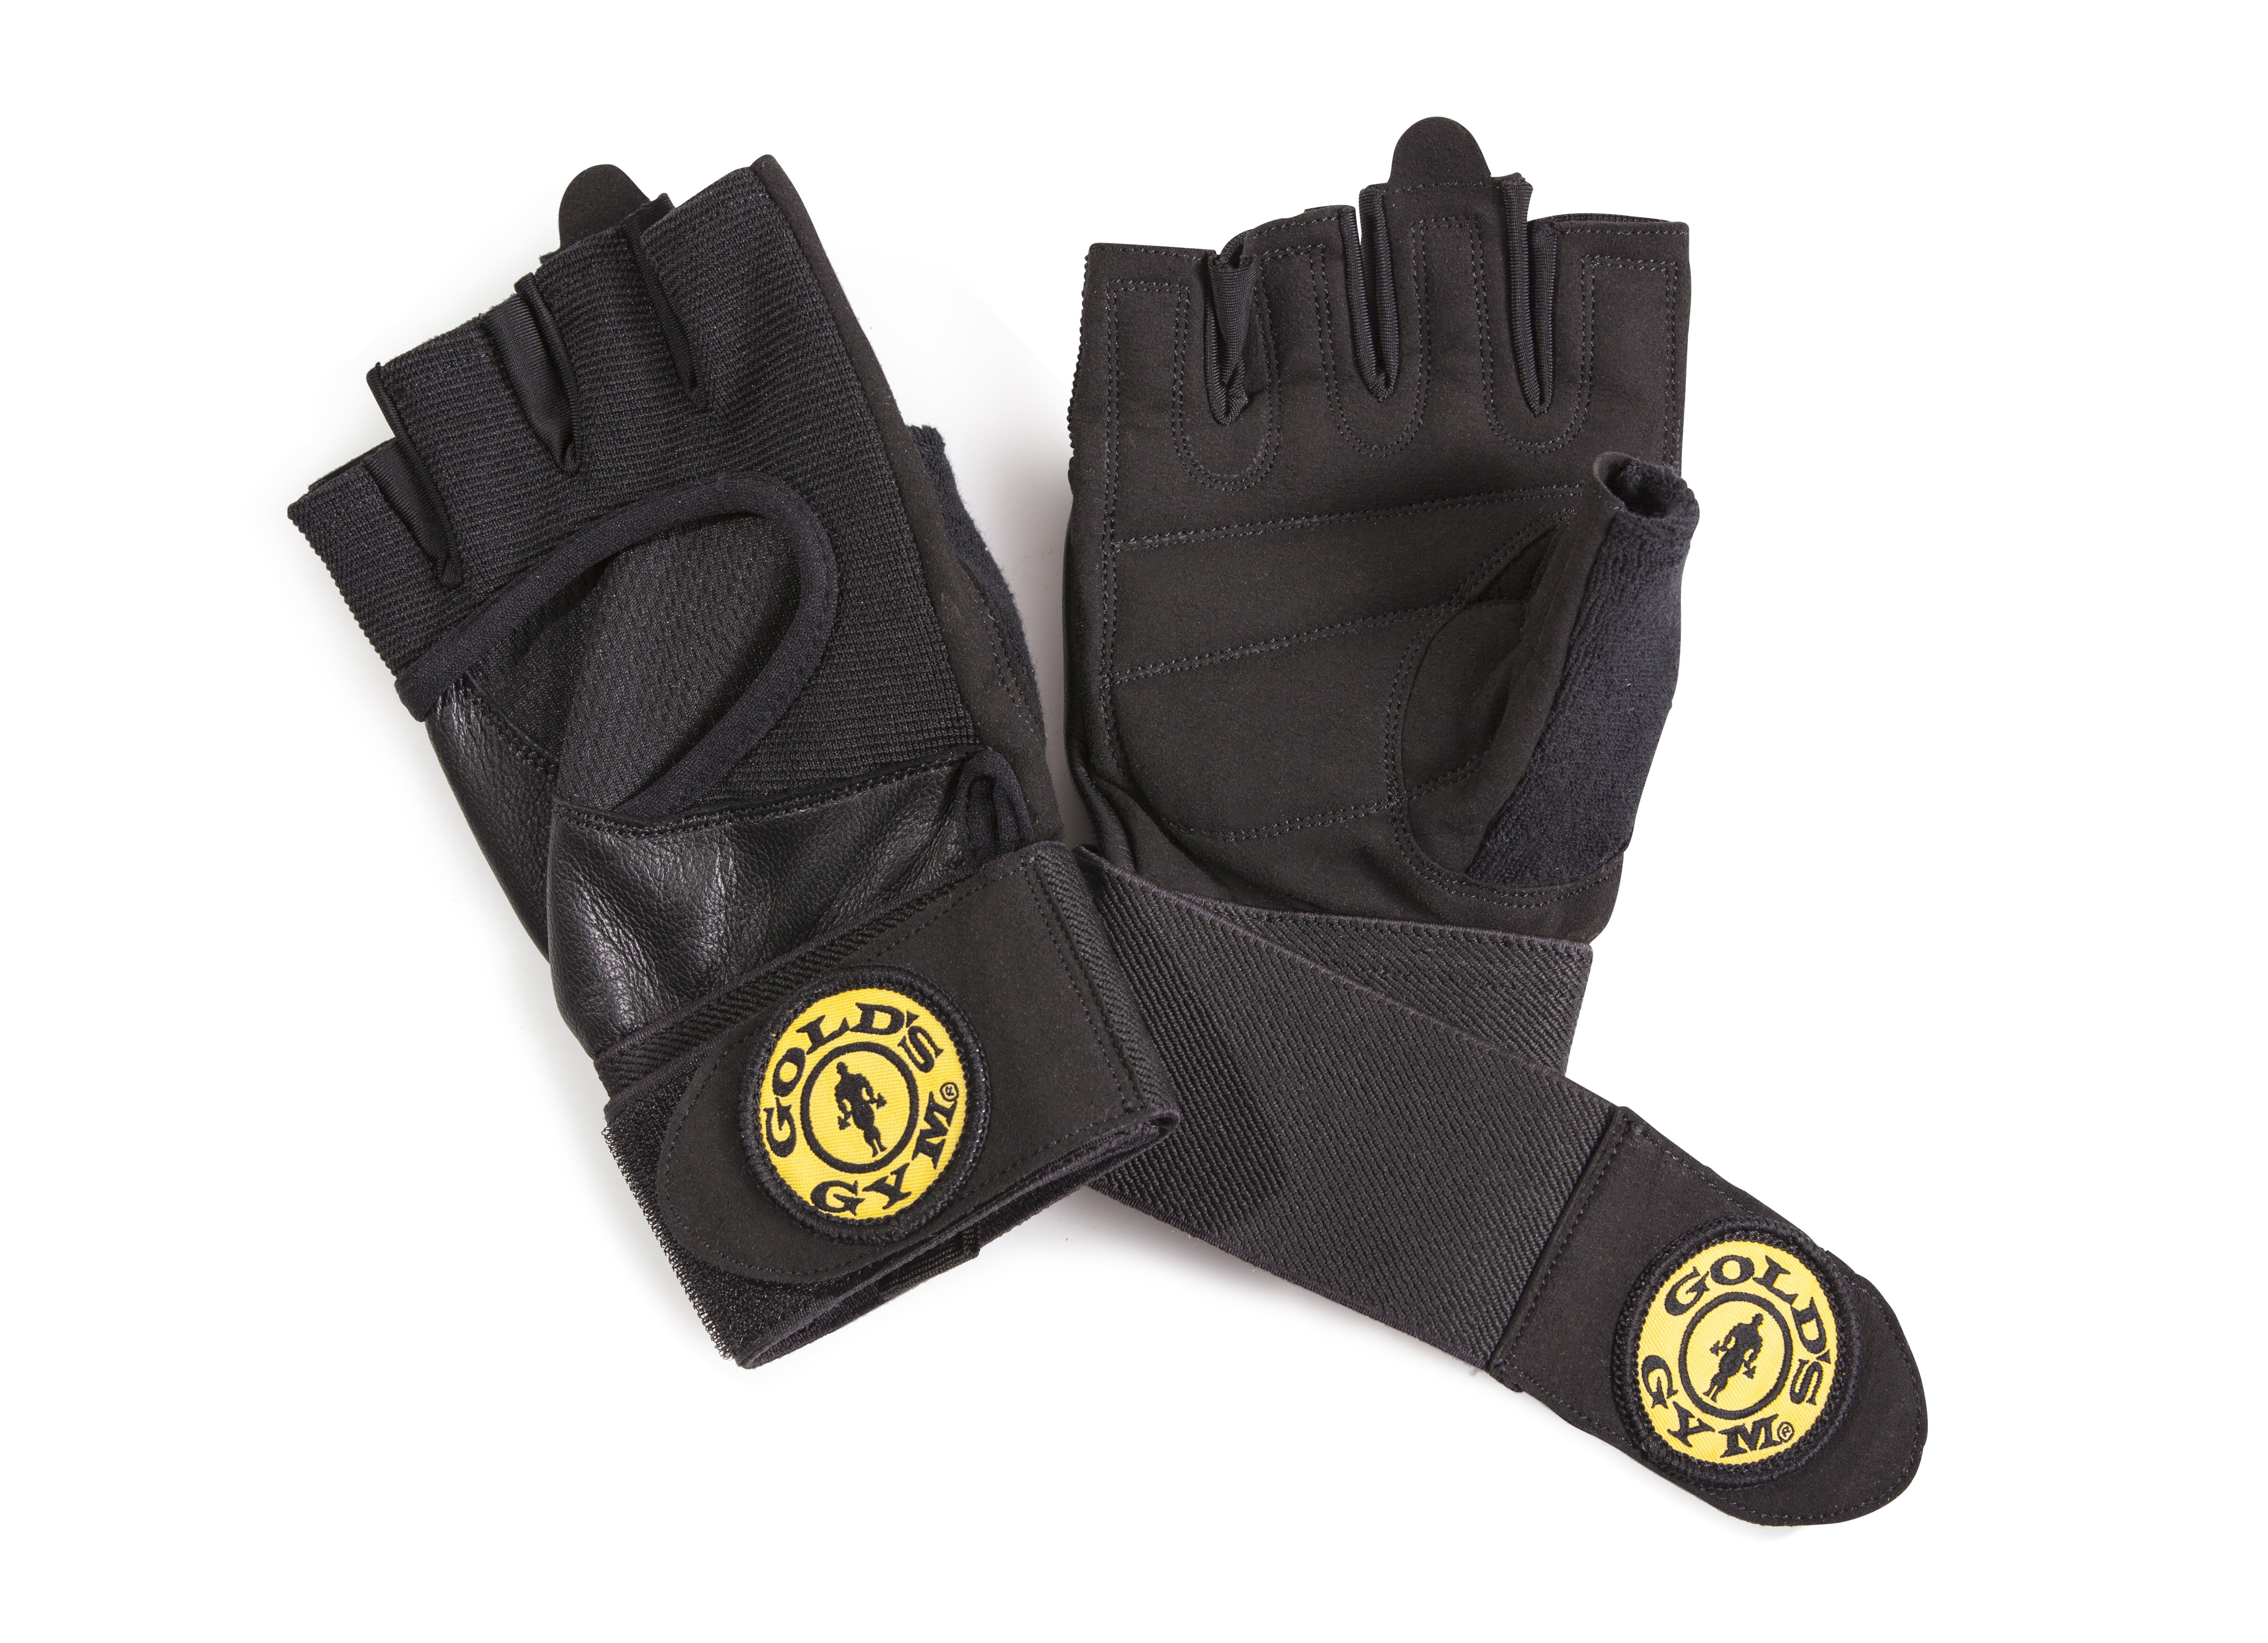 Golds GYM Max Lift Leather Weight Lifting Gloves Body Building Uneed Gym Gloves